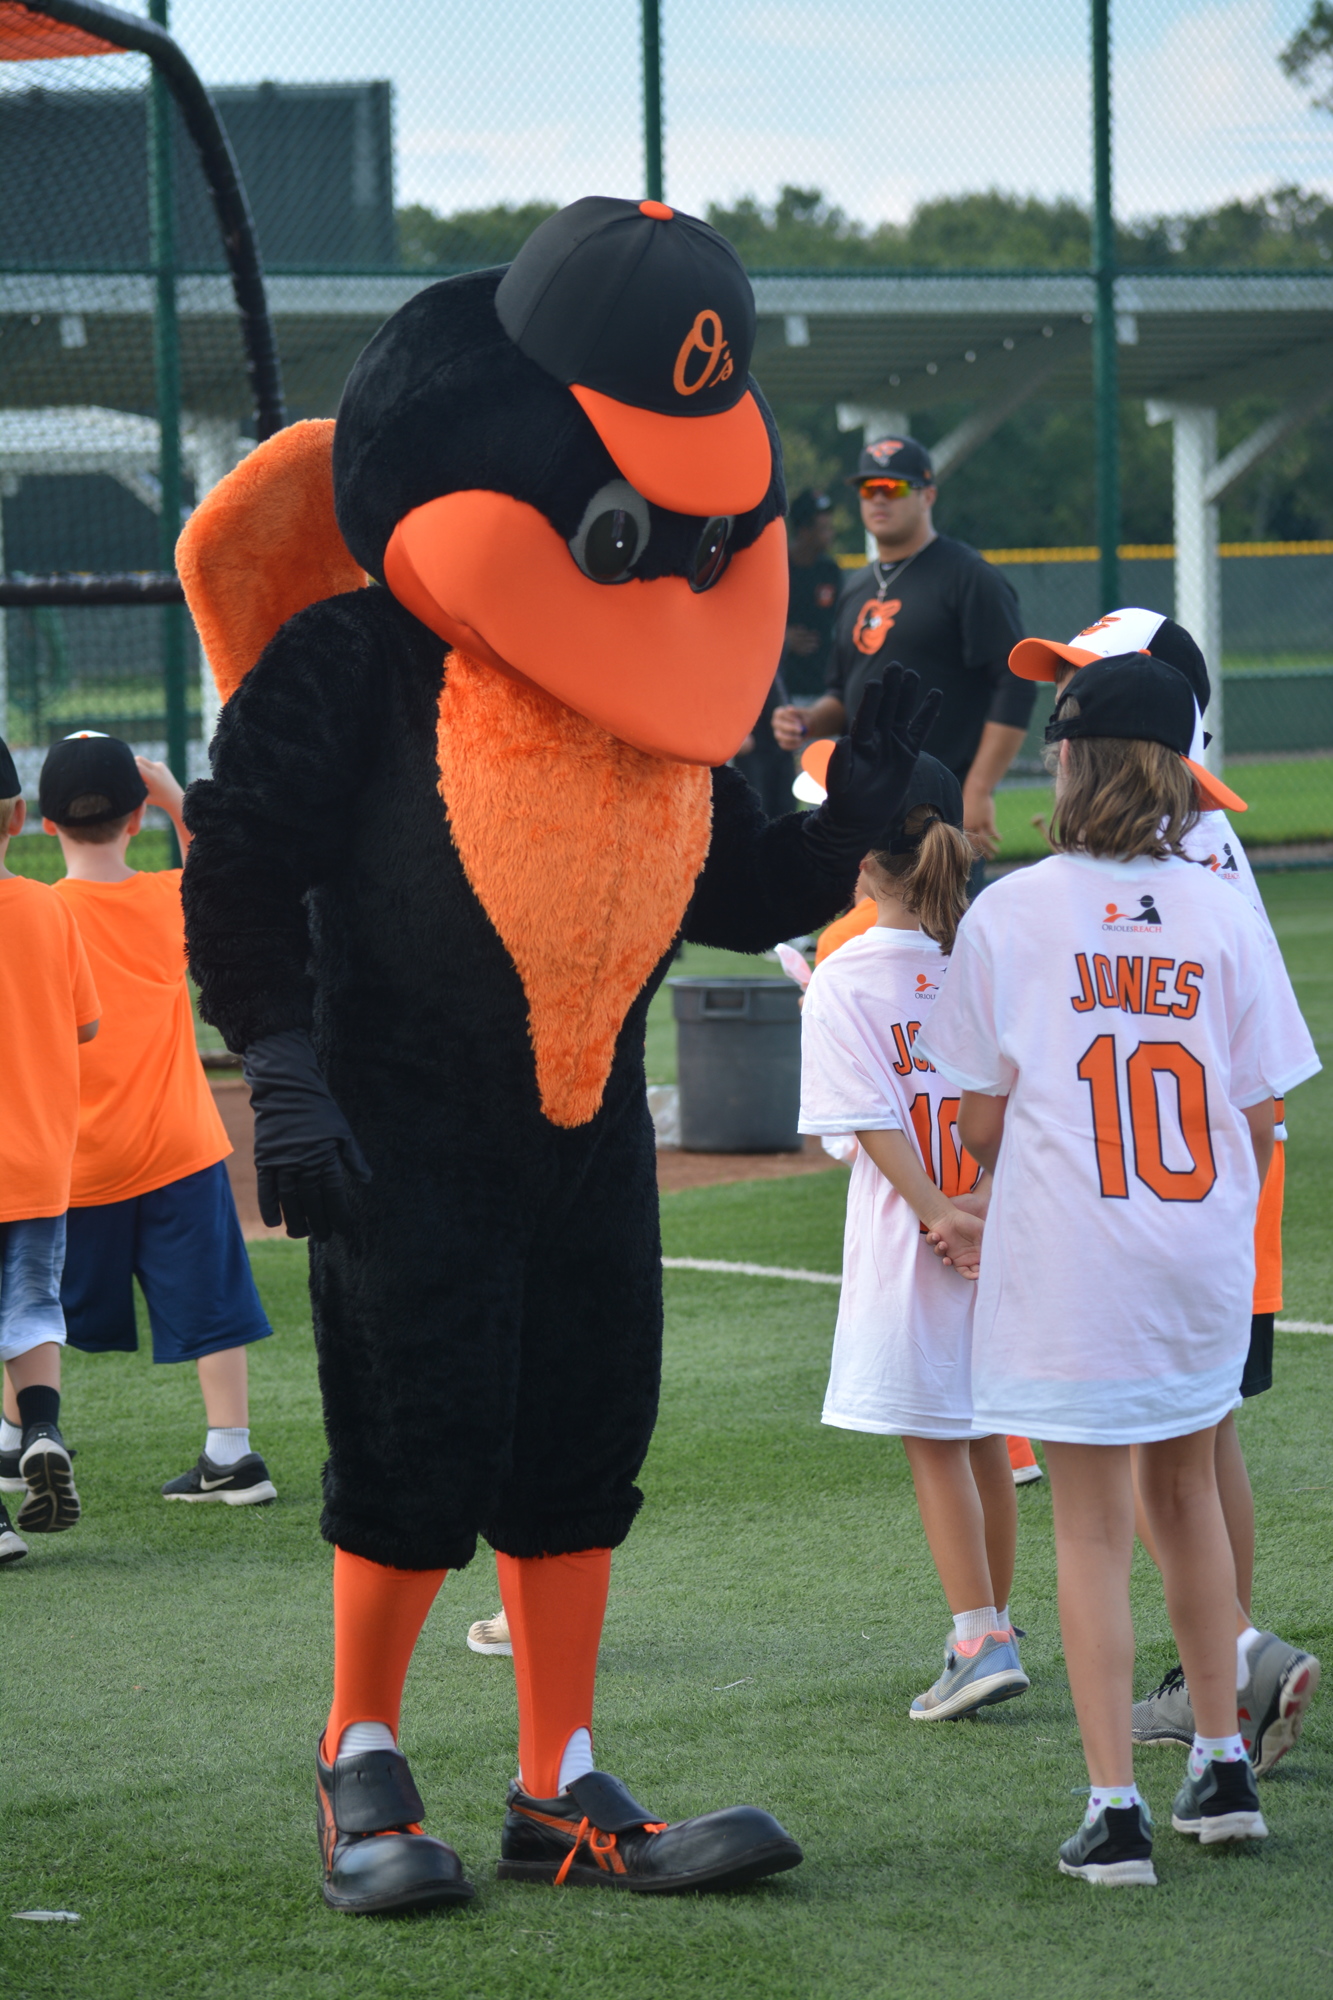 The Oriole Bird greeted campers as they arrived at Ed Smith Stadium.